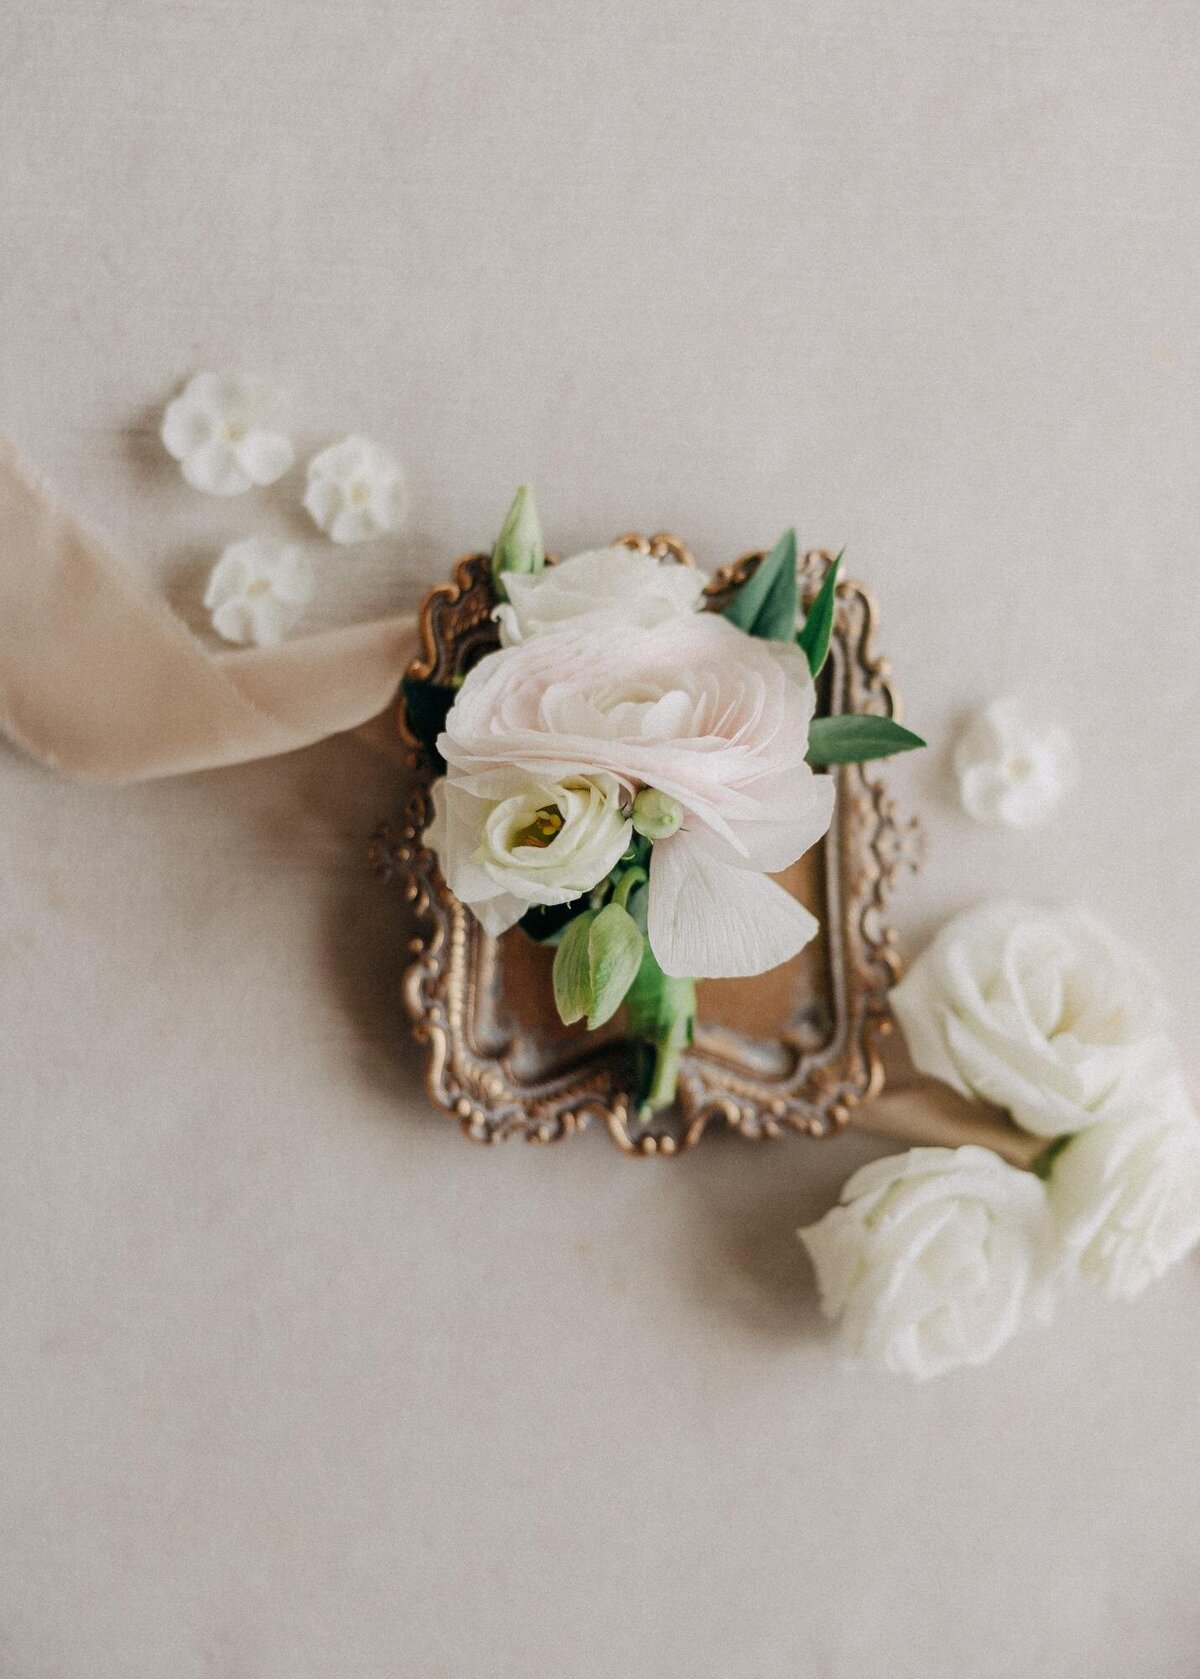 An elegant floral arrangement on an antique frame, accompanied by delicate white flowers and a ribbon on a neutral backdrop.